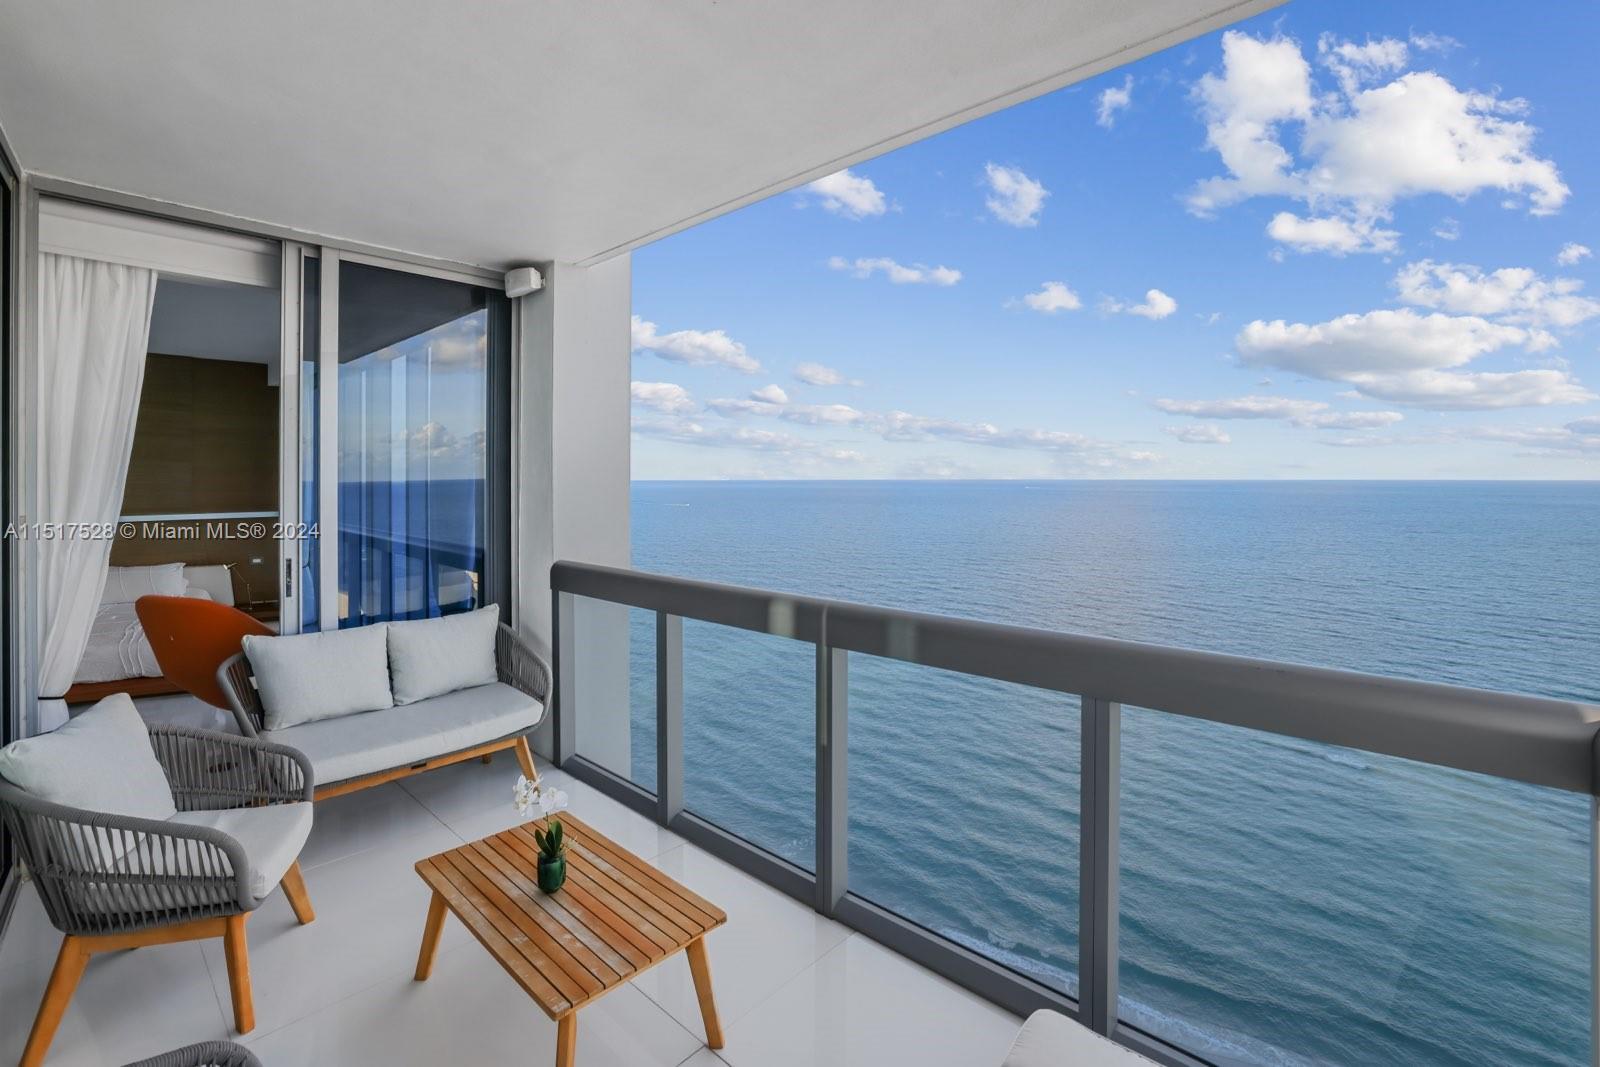 Listing Image 6899 Collins Ave #2208